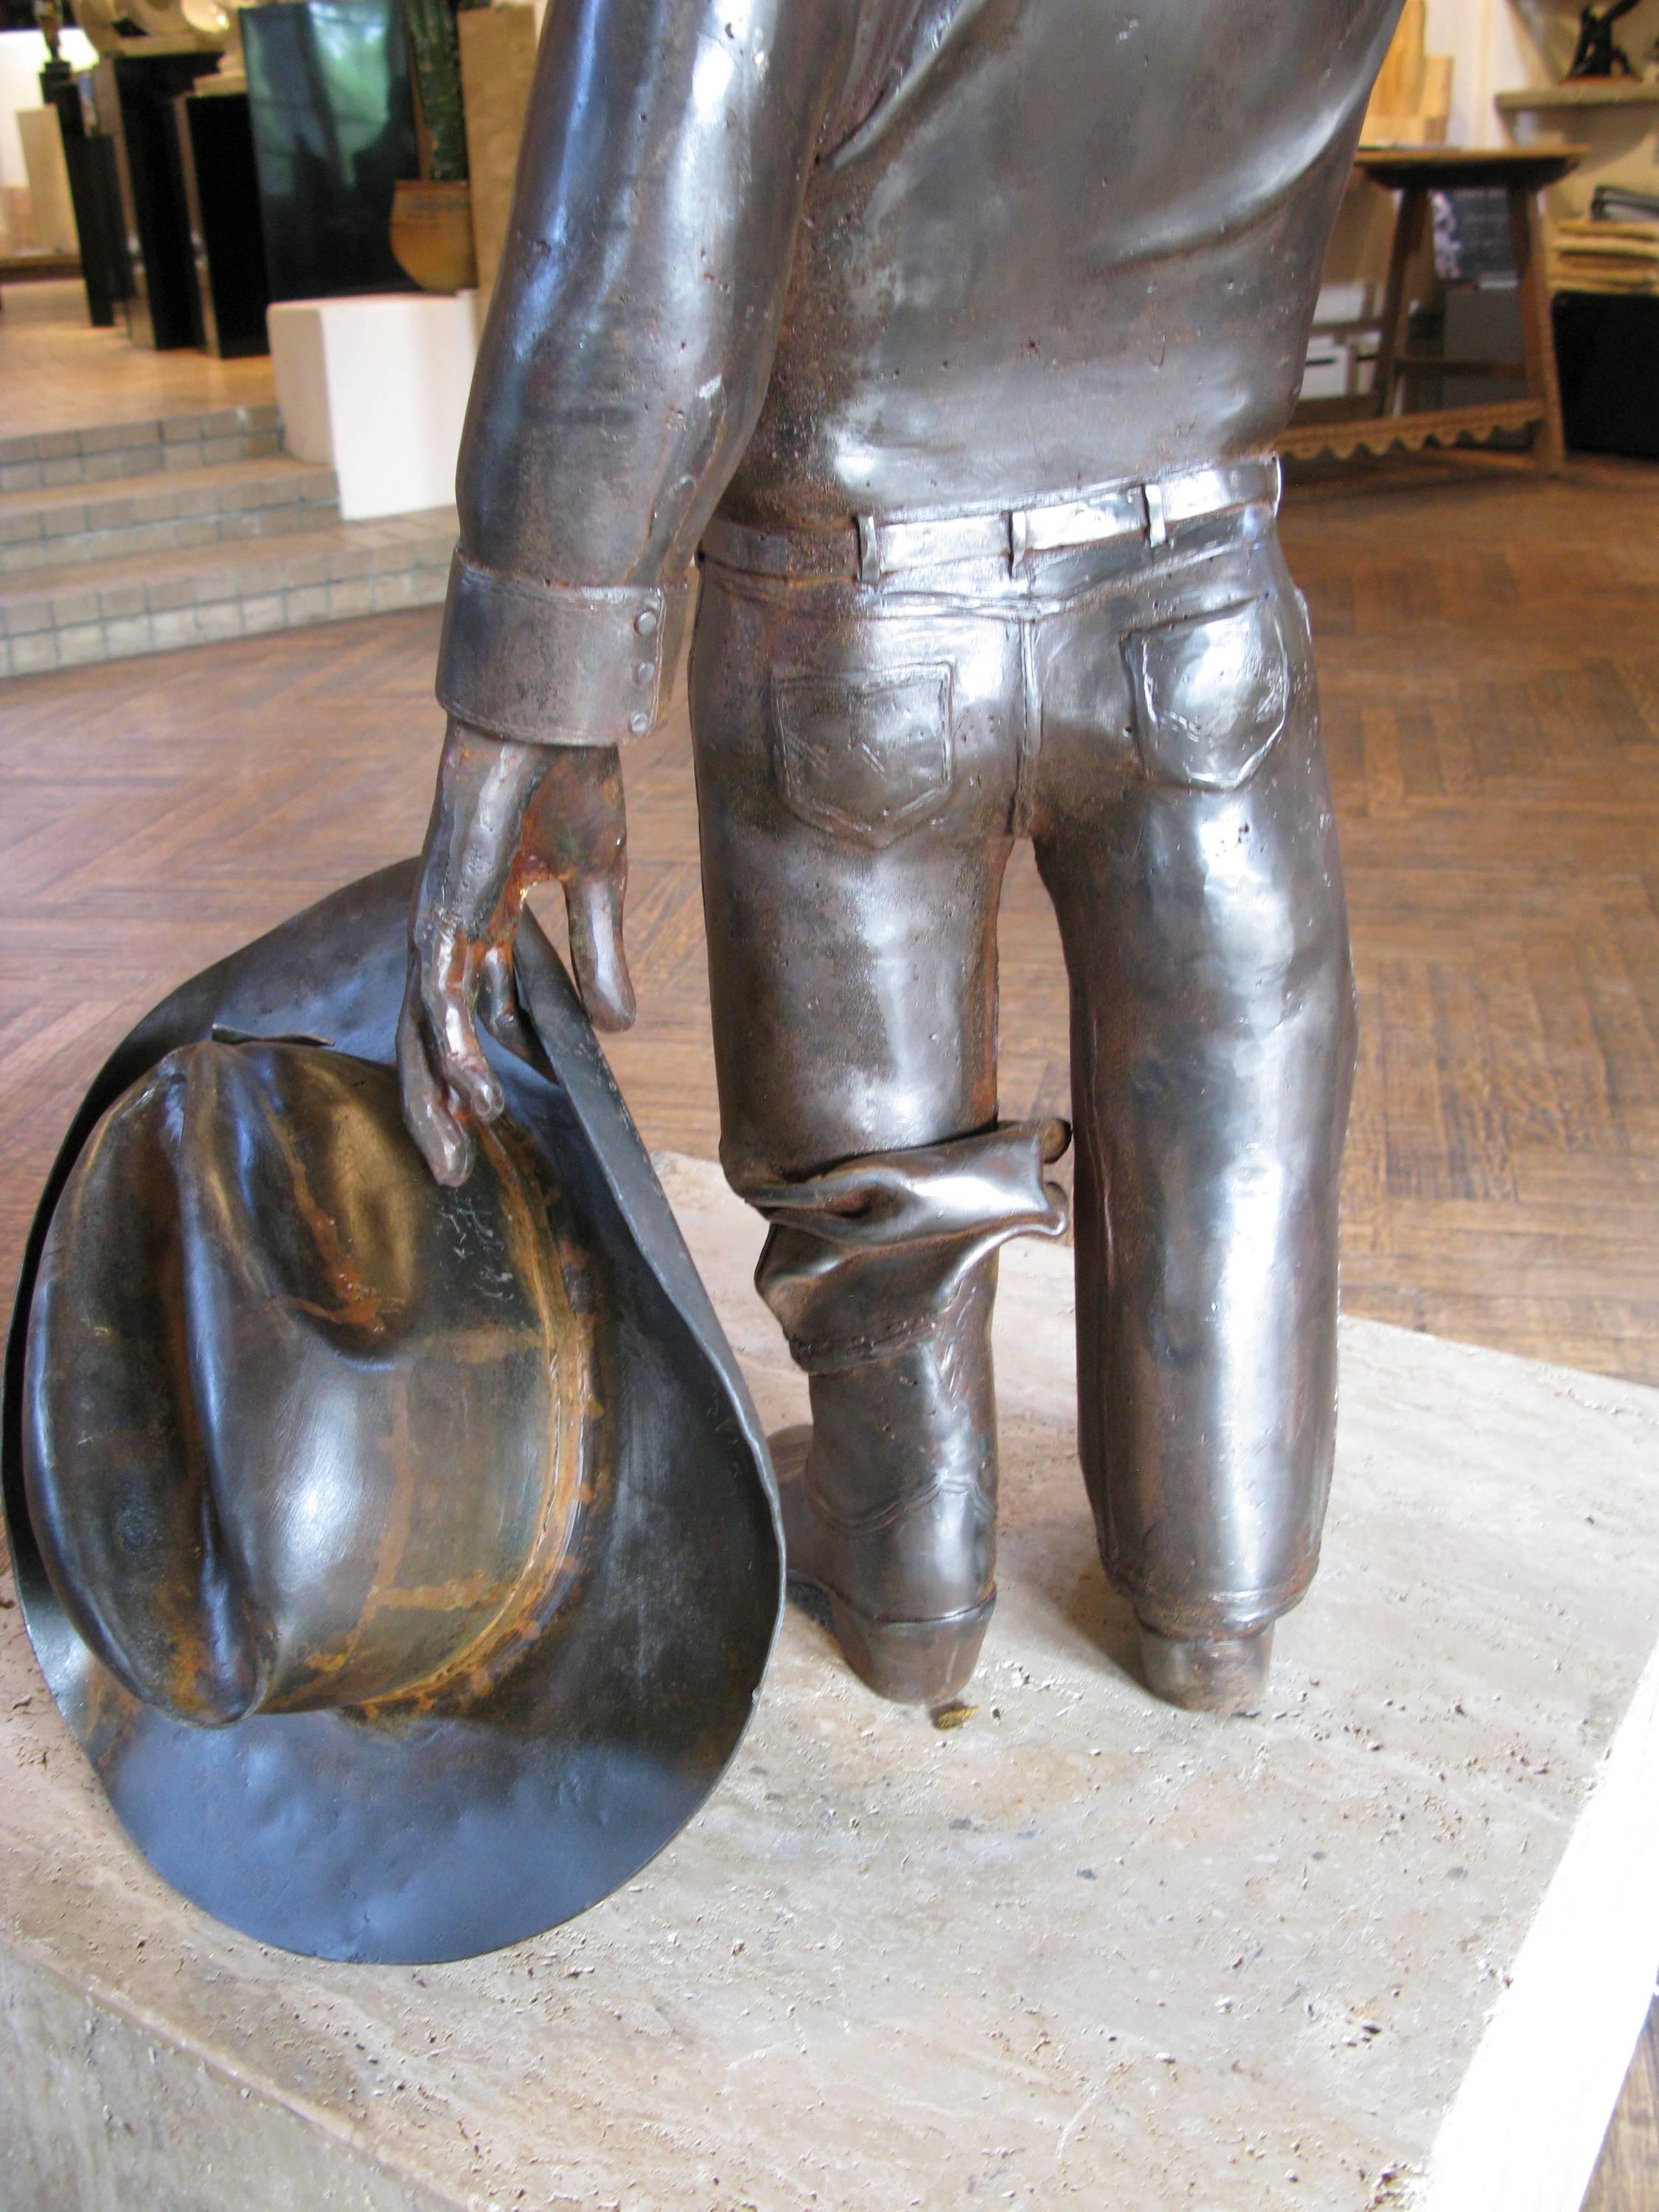 Howdy, by Rodger Jacobsen,  steel sculpture, cowboy, stetson hat, boots, Texas 7